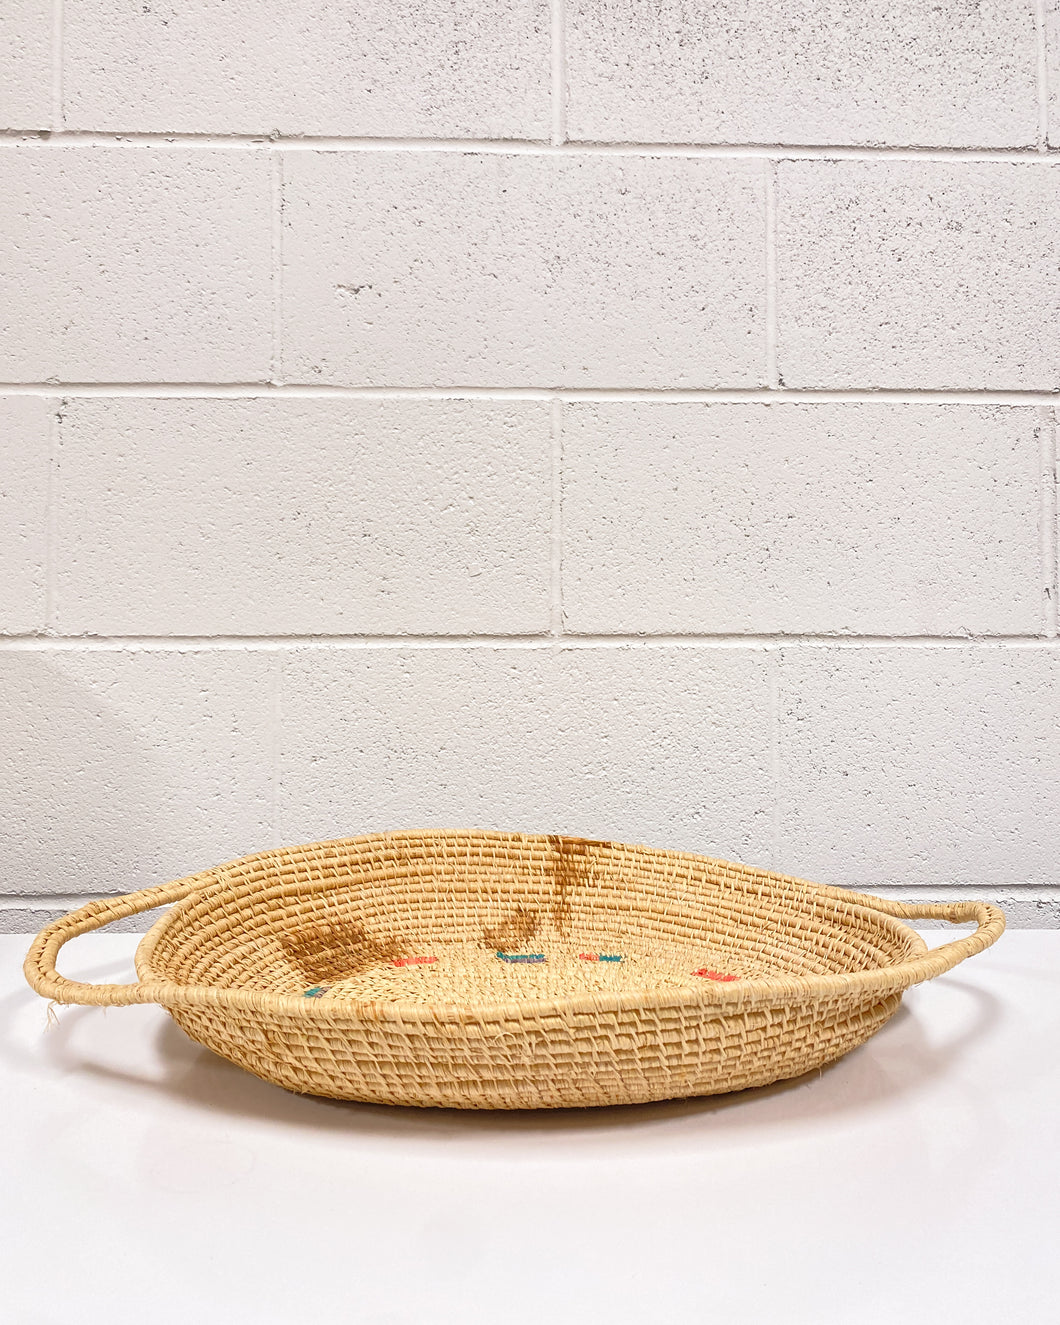 Vintage Woven Tray with Color Accents - As Found